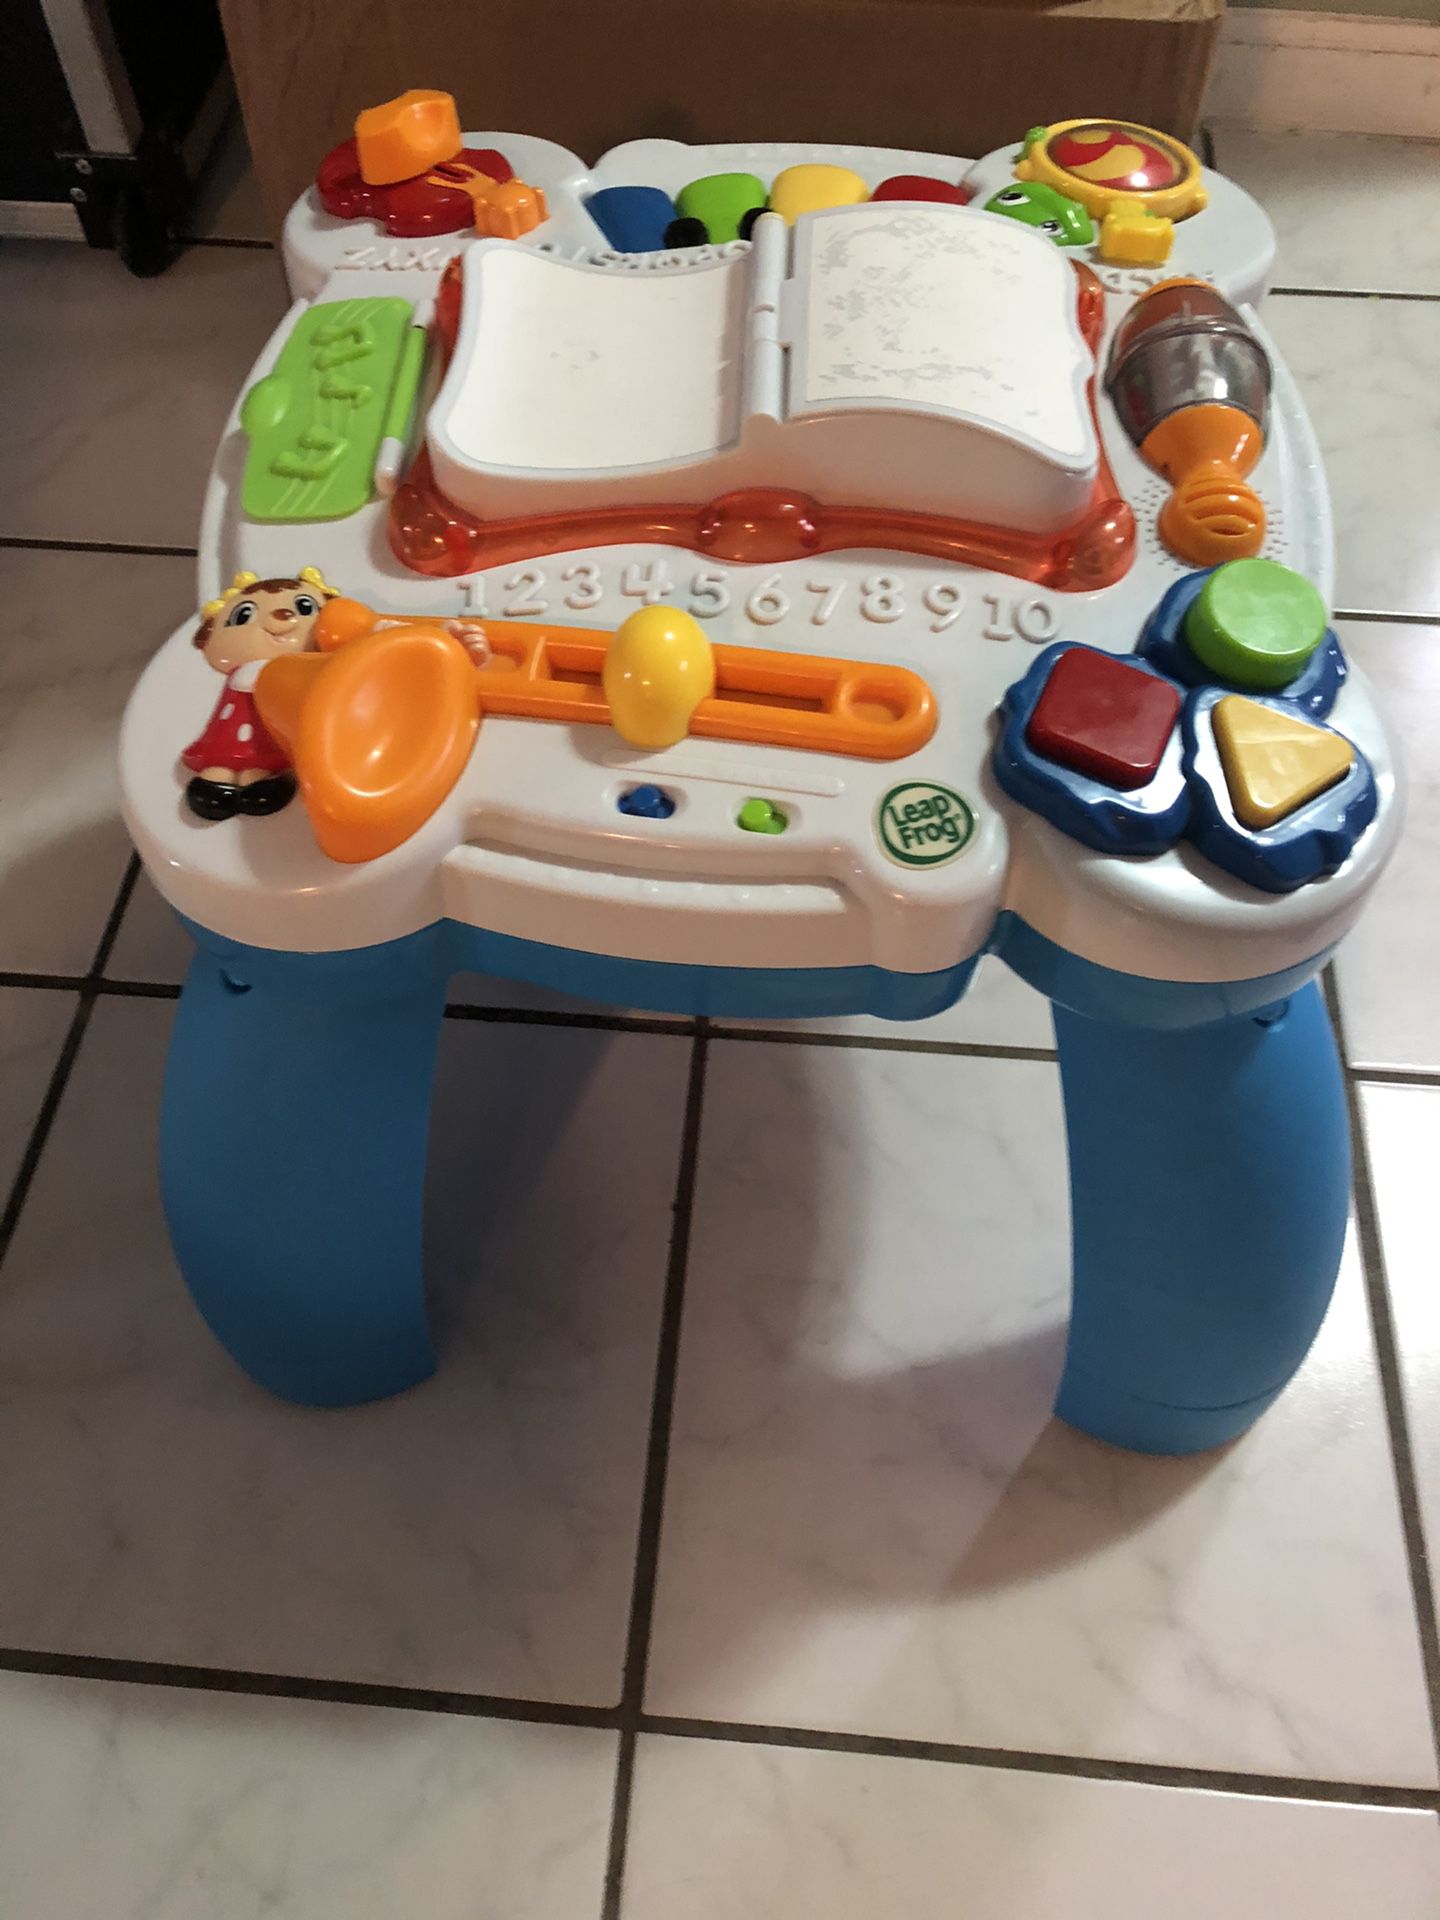 Free Leap frog musical activity table